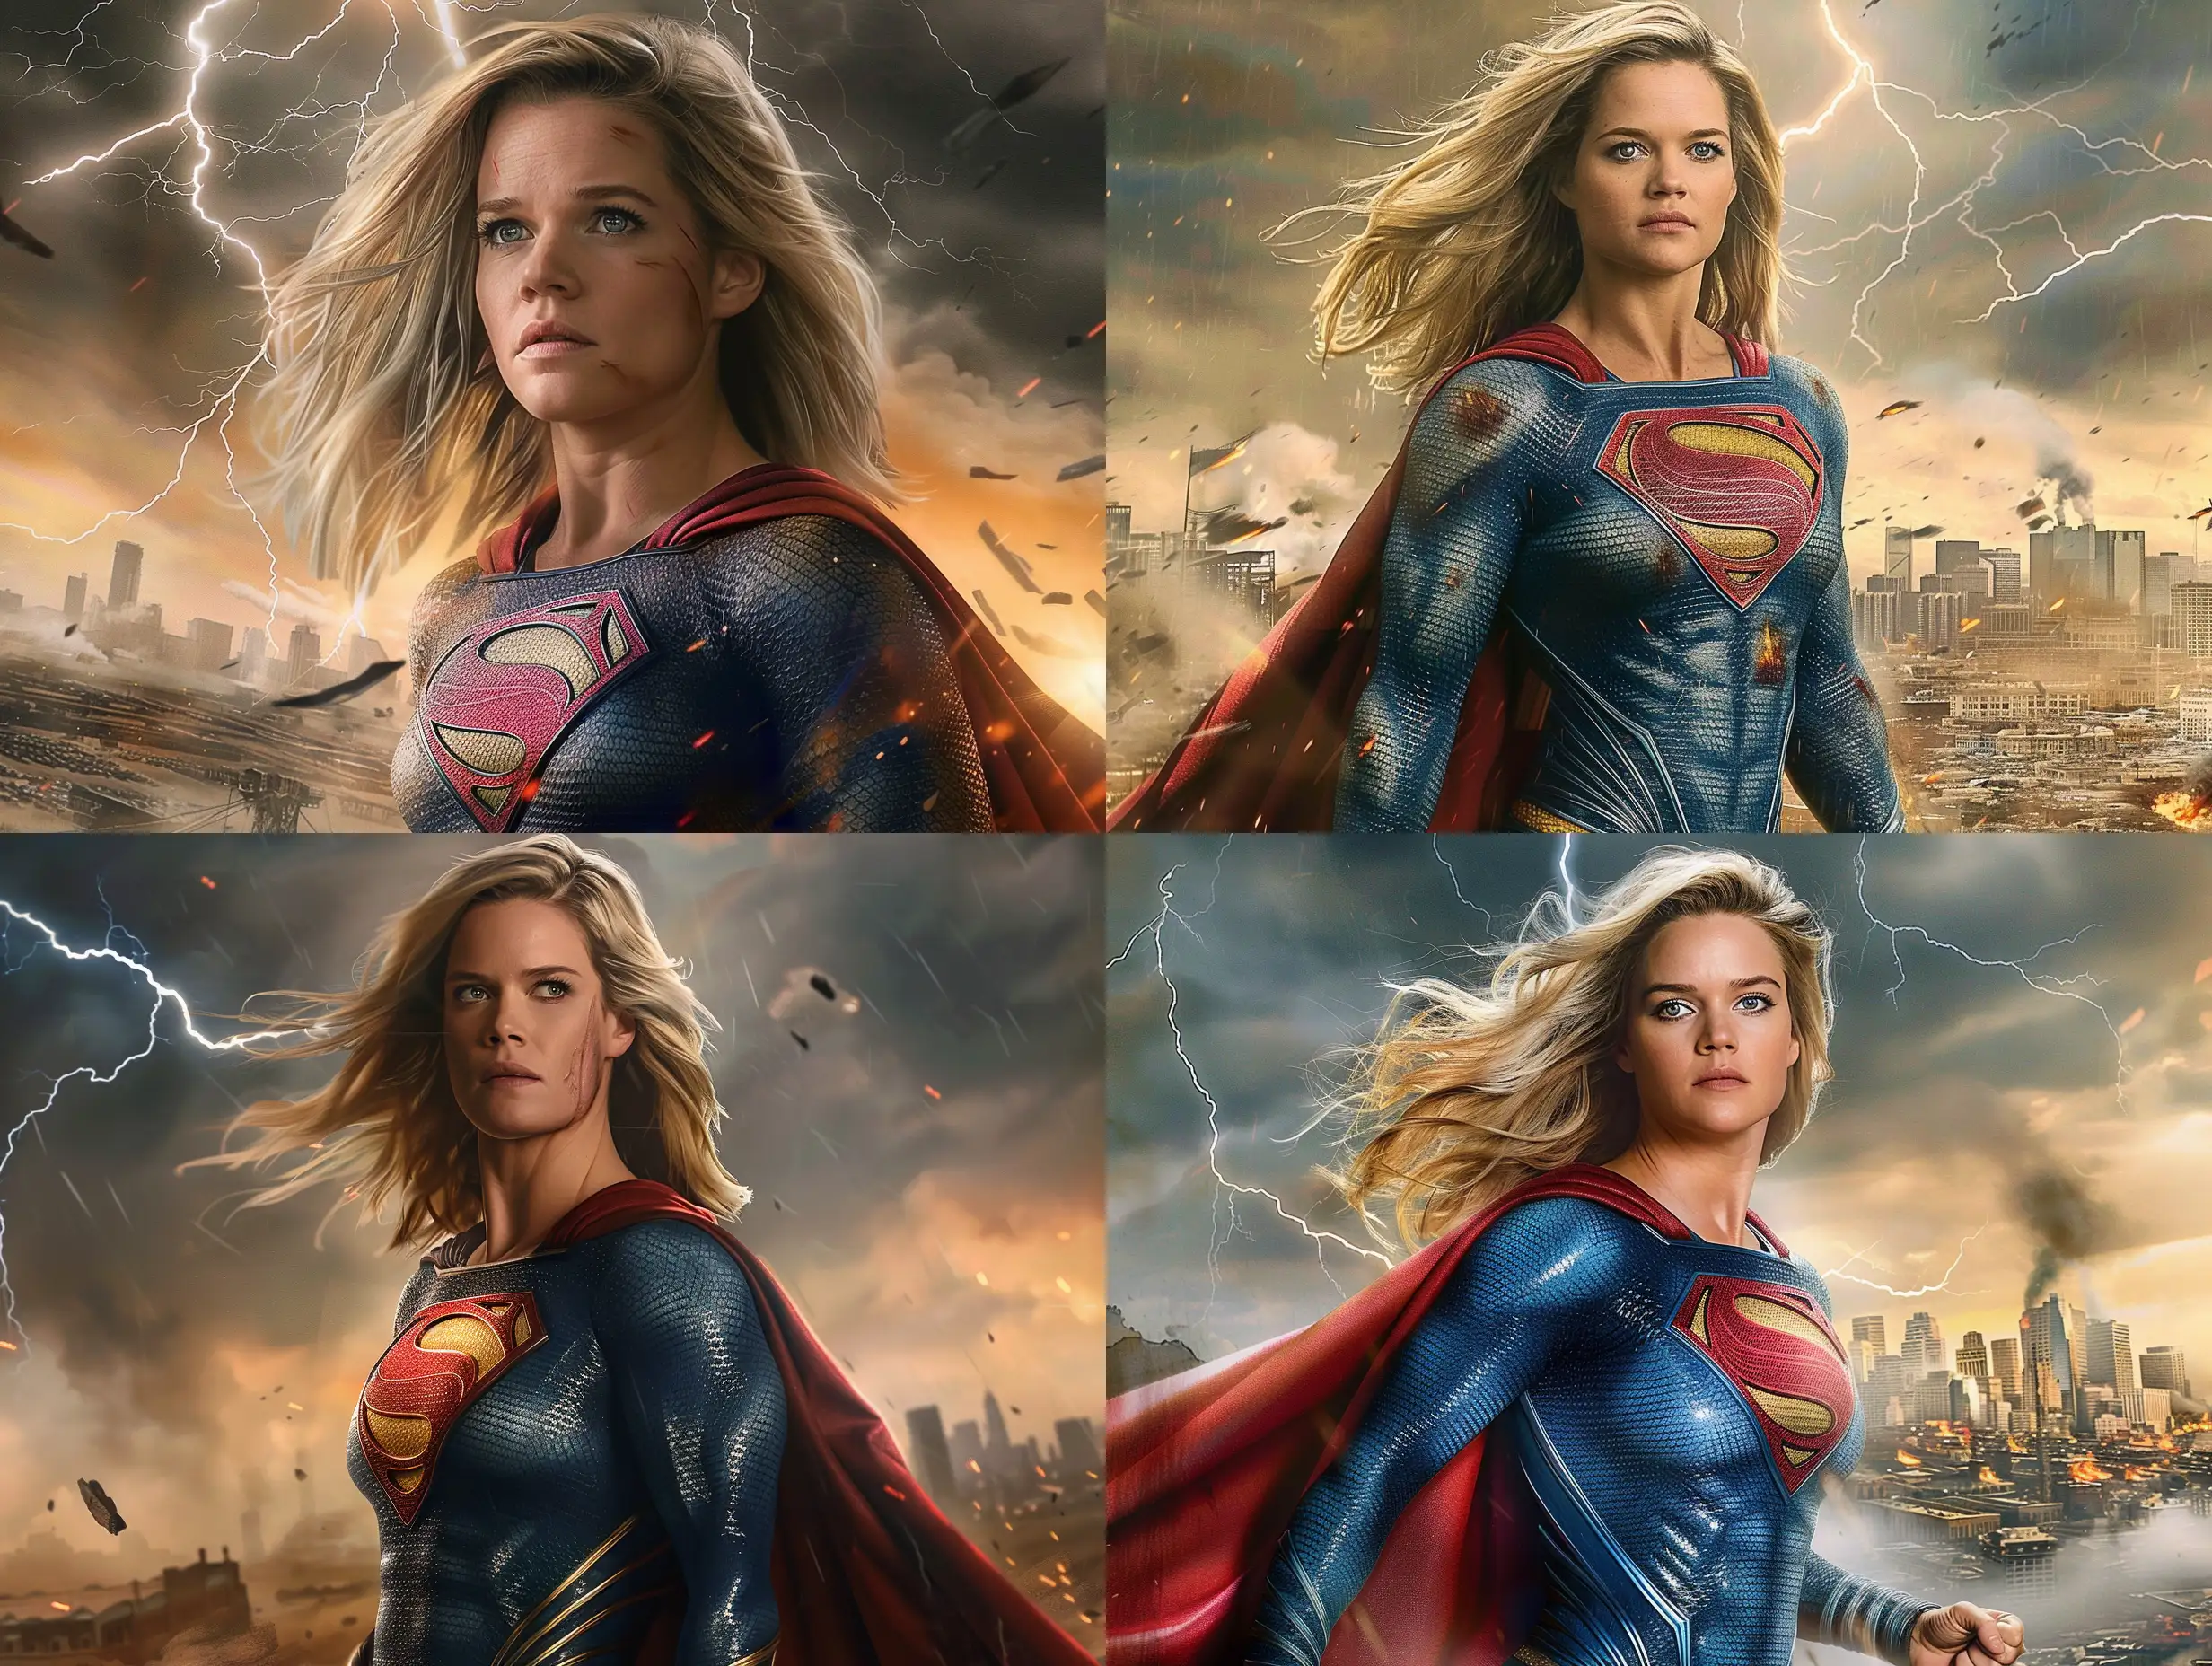 Reese-Witherspoon-Superhero-Movie-Poster-Artistic-Superman-Pose-with-City-Chaos-Background